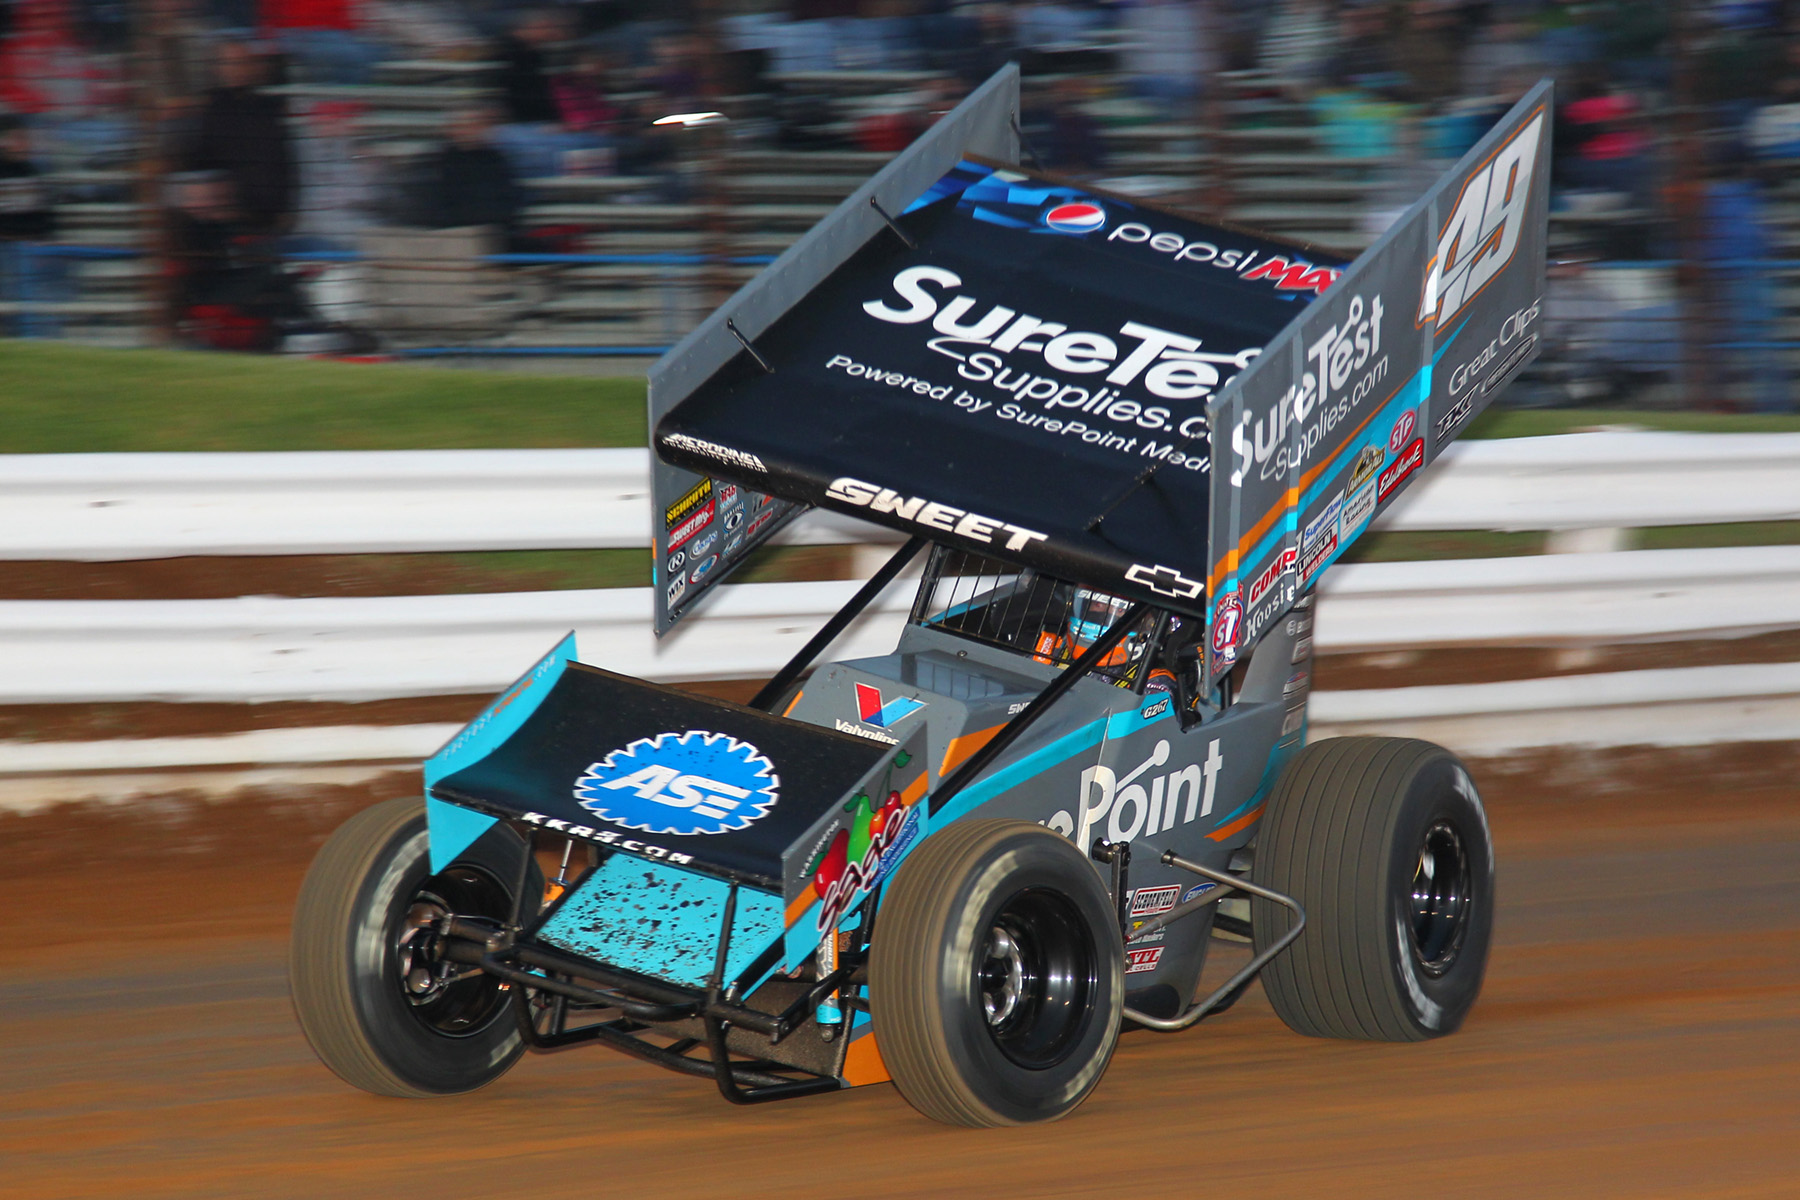 Commercial Photographer- York, PA - TD Photographic Imaging Williams Grove Speedway Brad Sweet